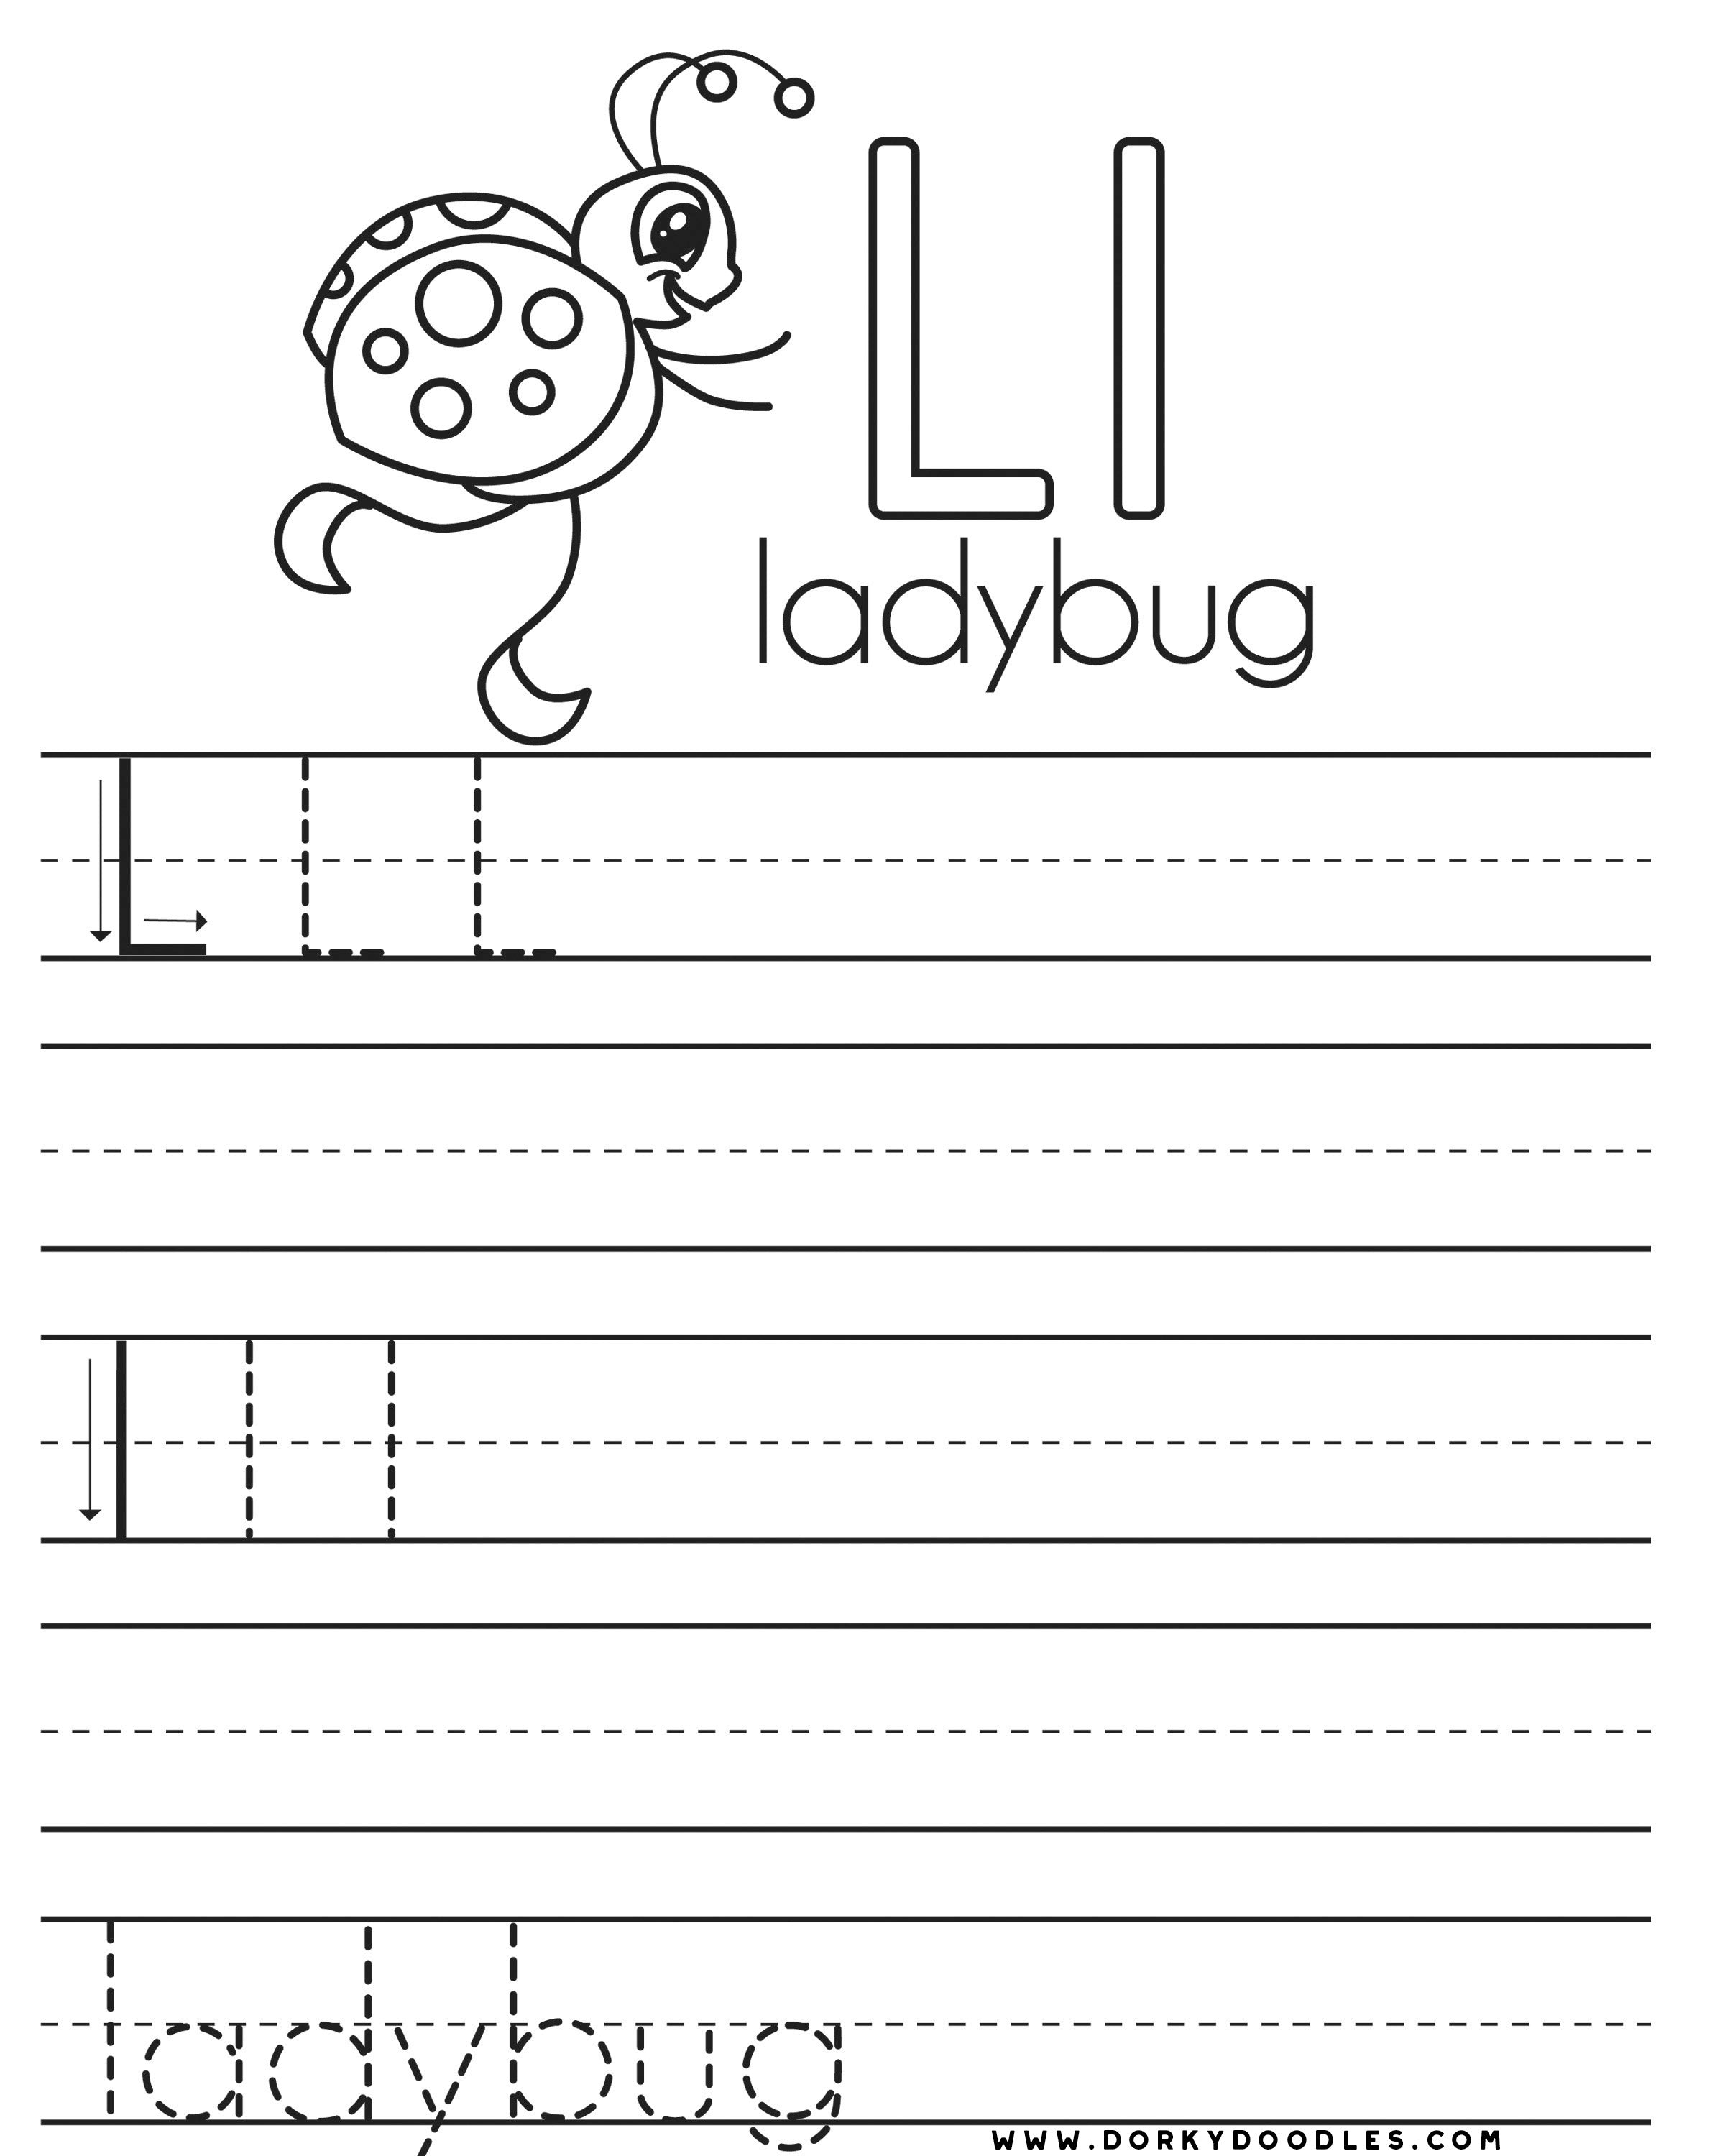 writing-the-letter-l-worksheets-free-download-goodimg-co